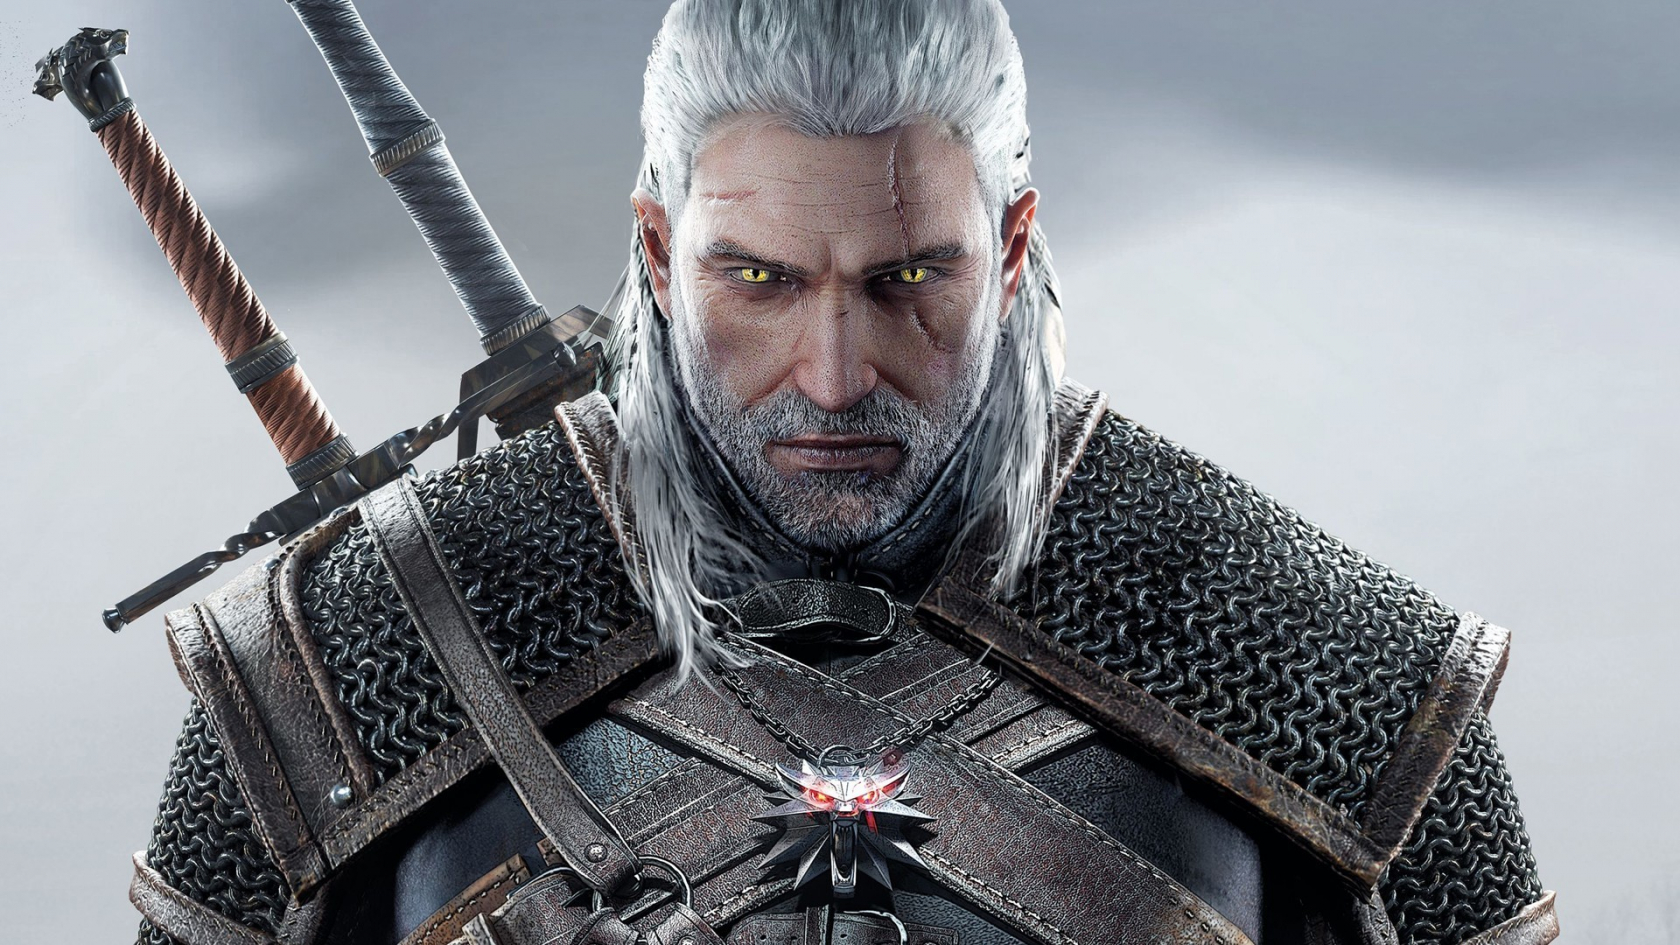 PC gamers choose Witcher 3 as their favorite title